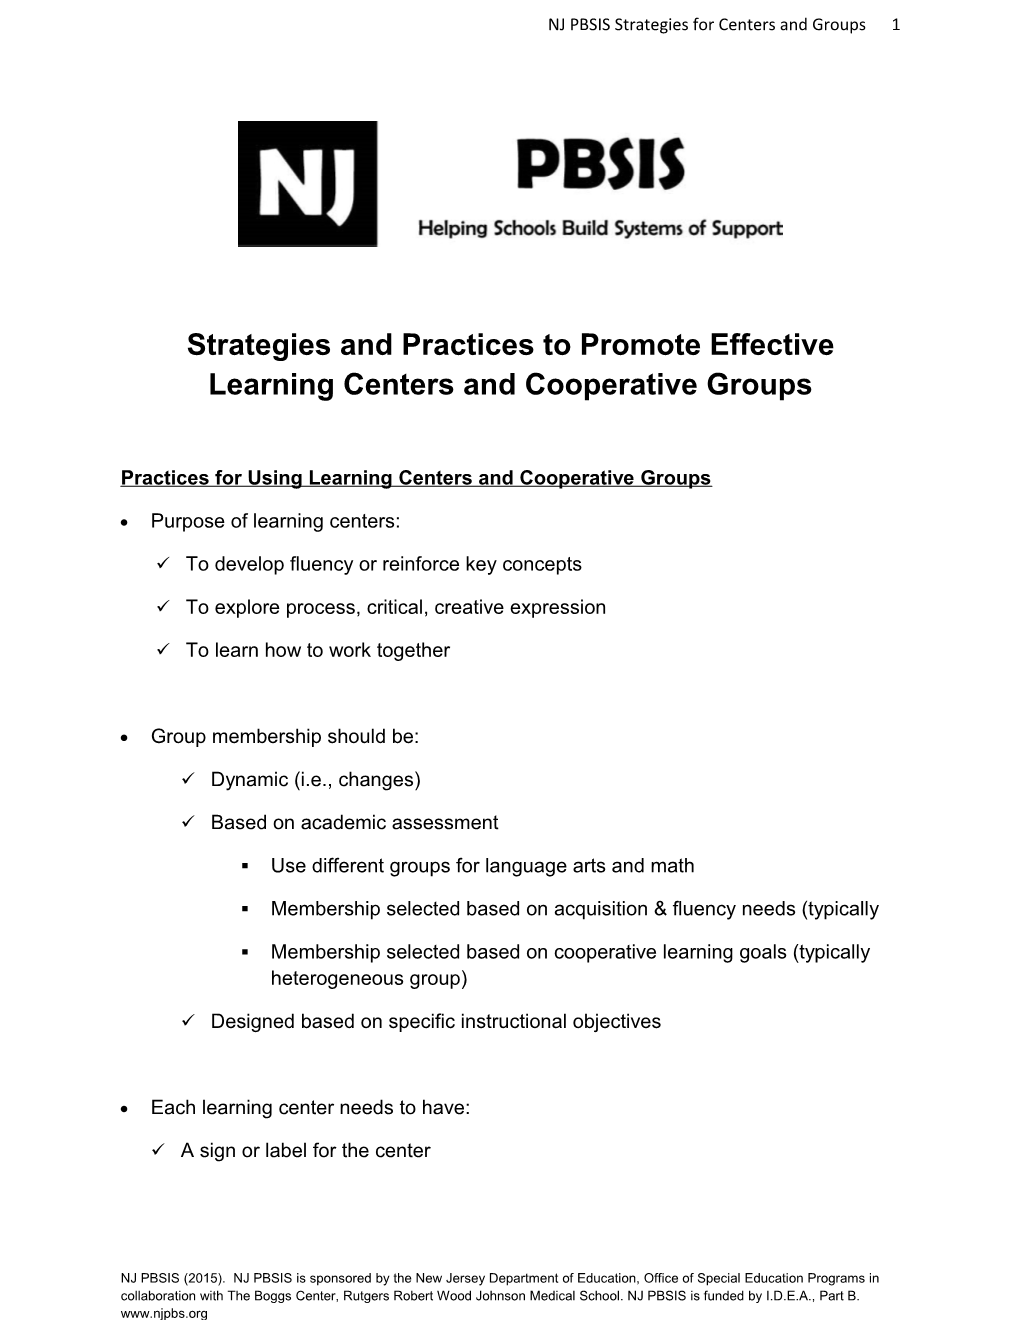 Strategies and Practices to Promote Effective Learning Centers and Cooperative Groups